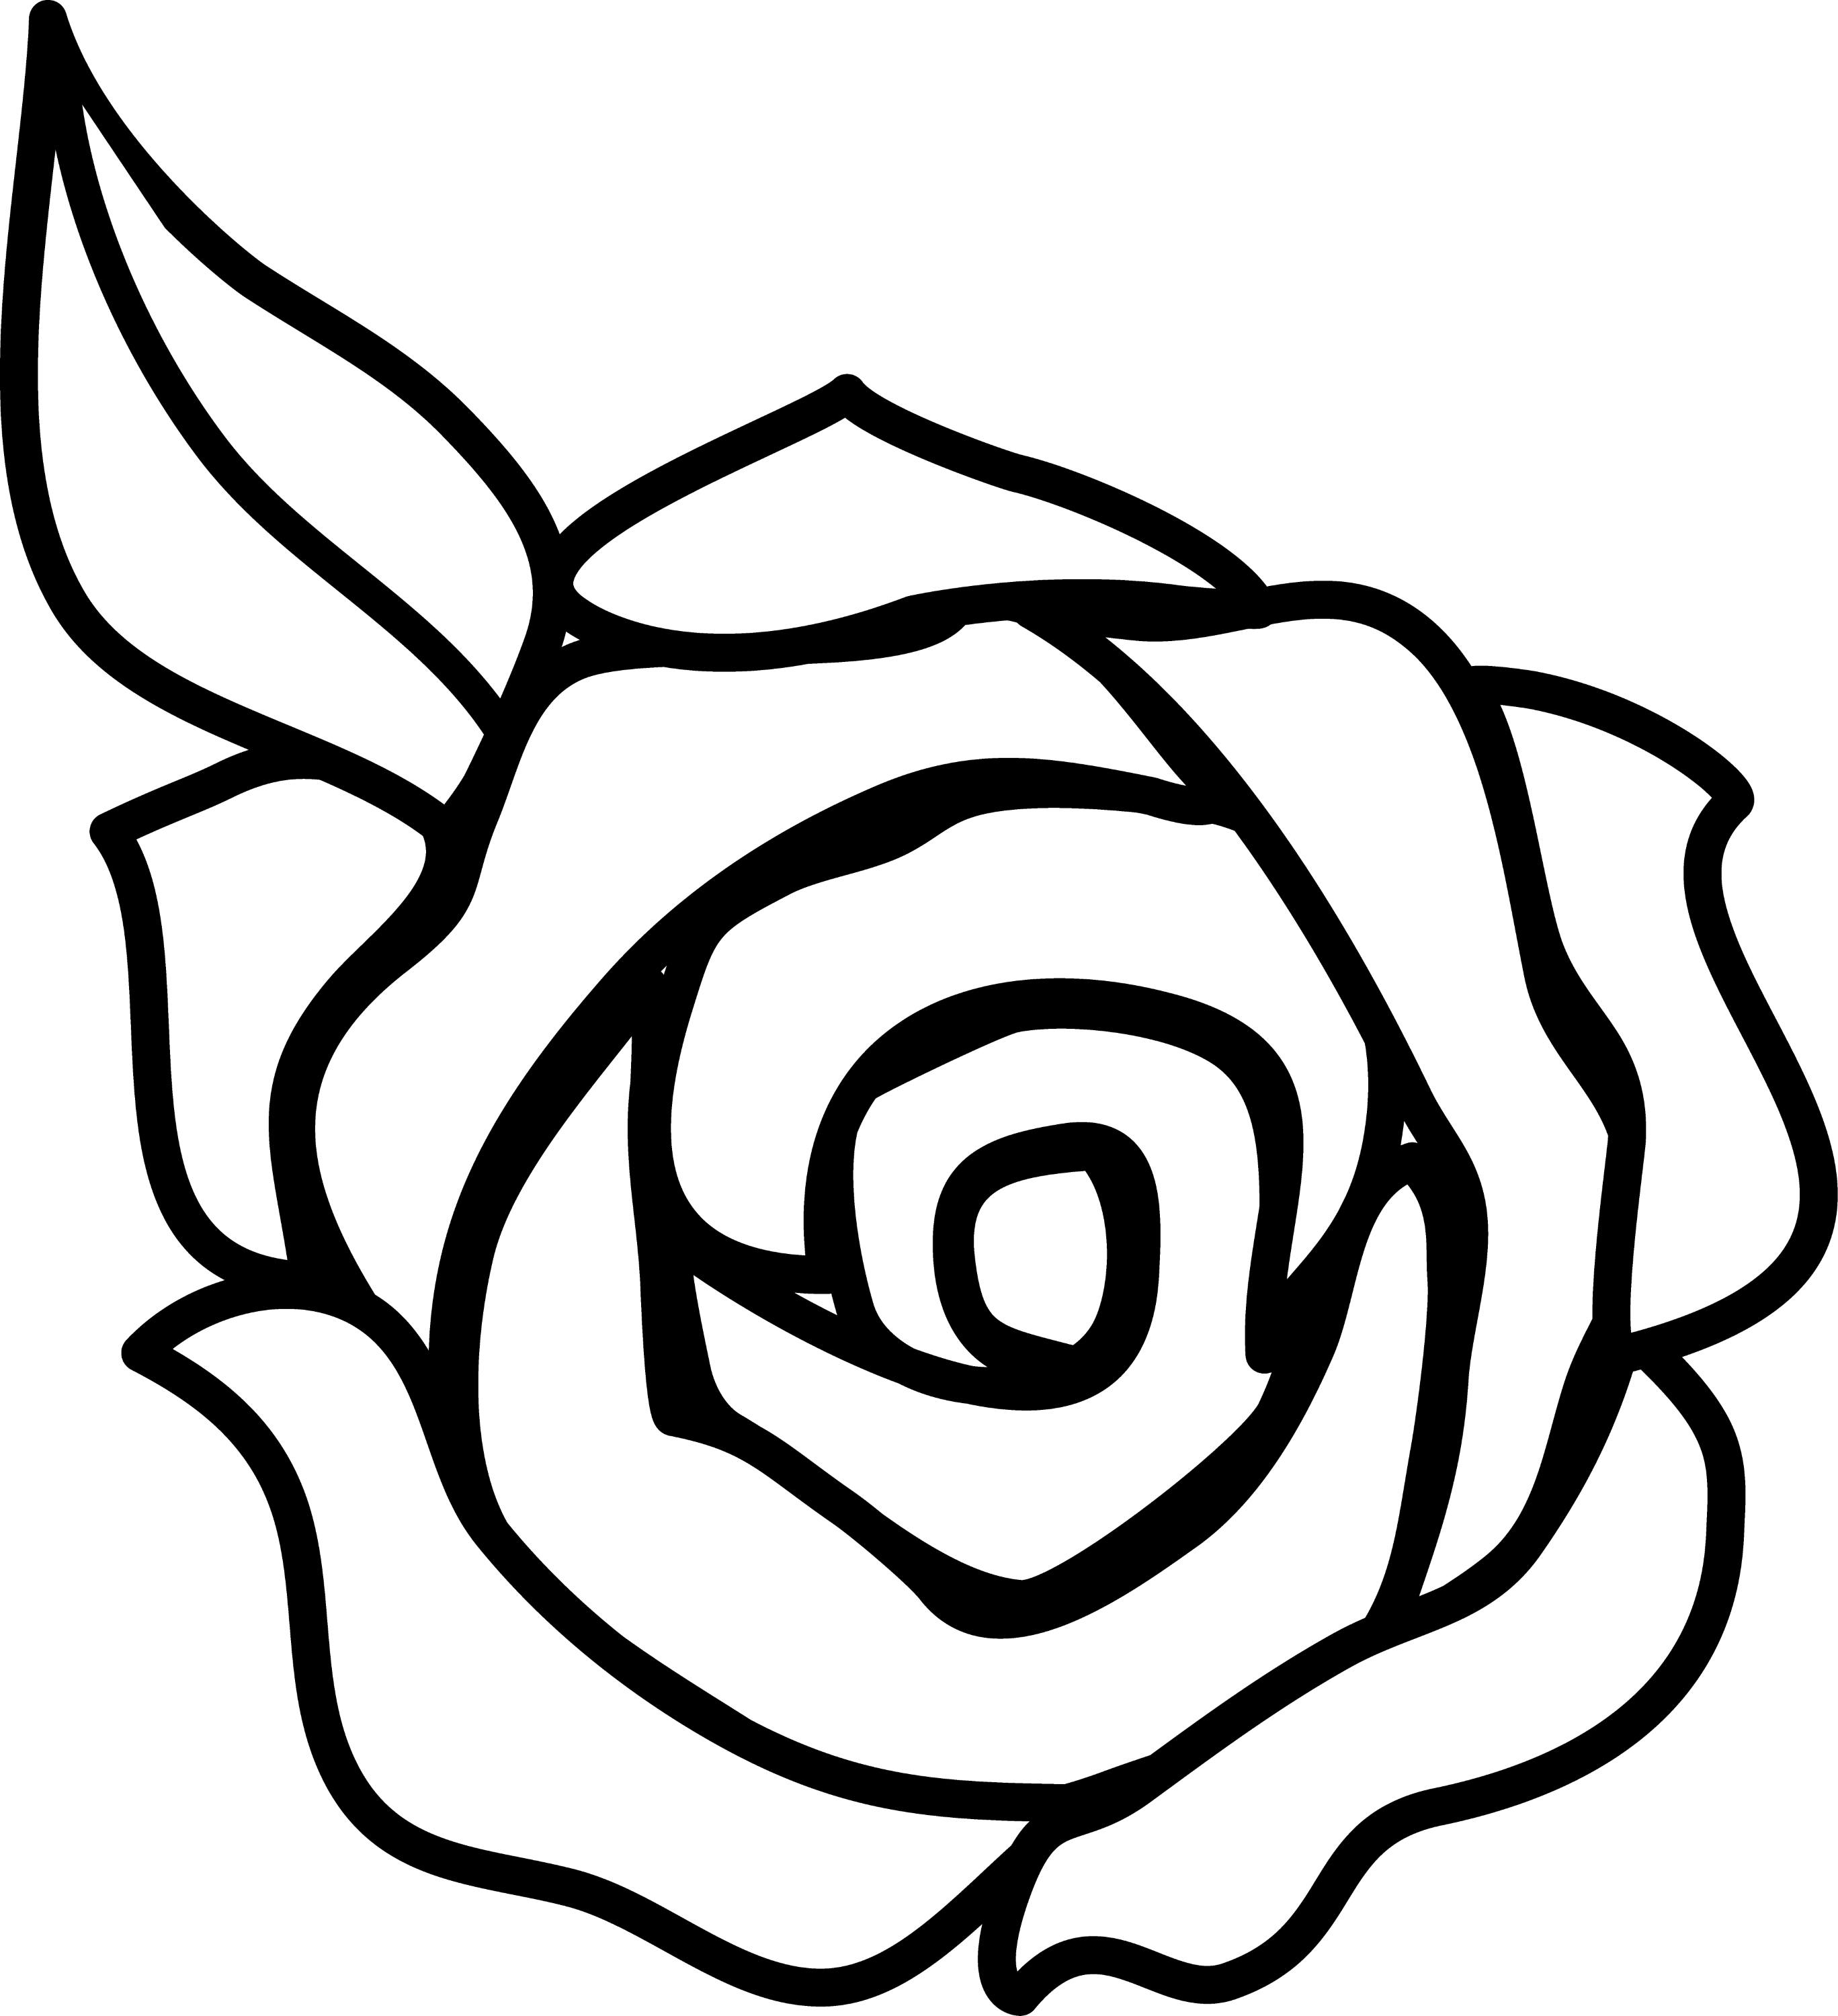 line of roses clipart - photo #4